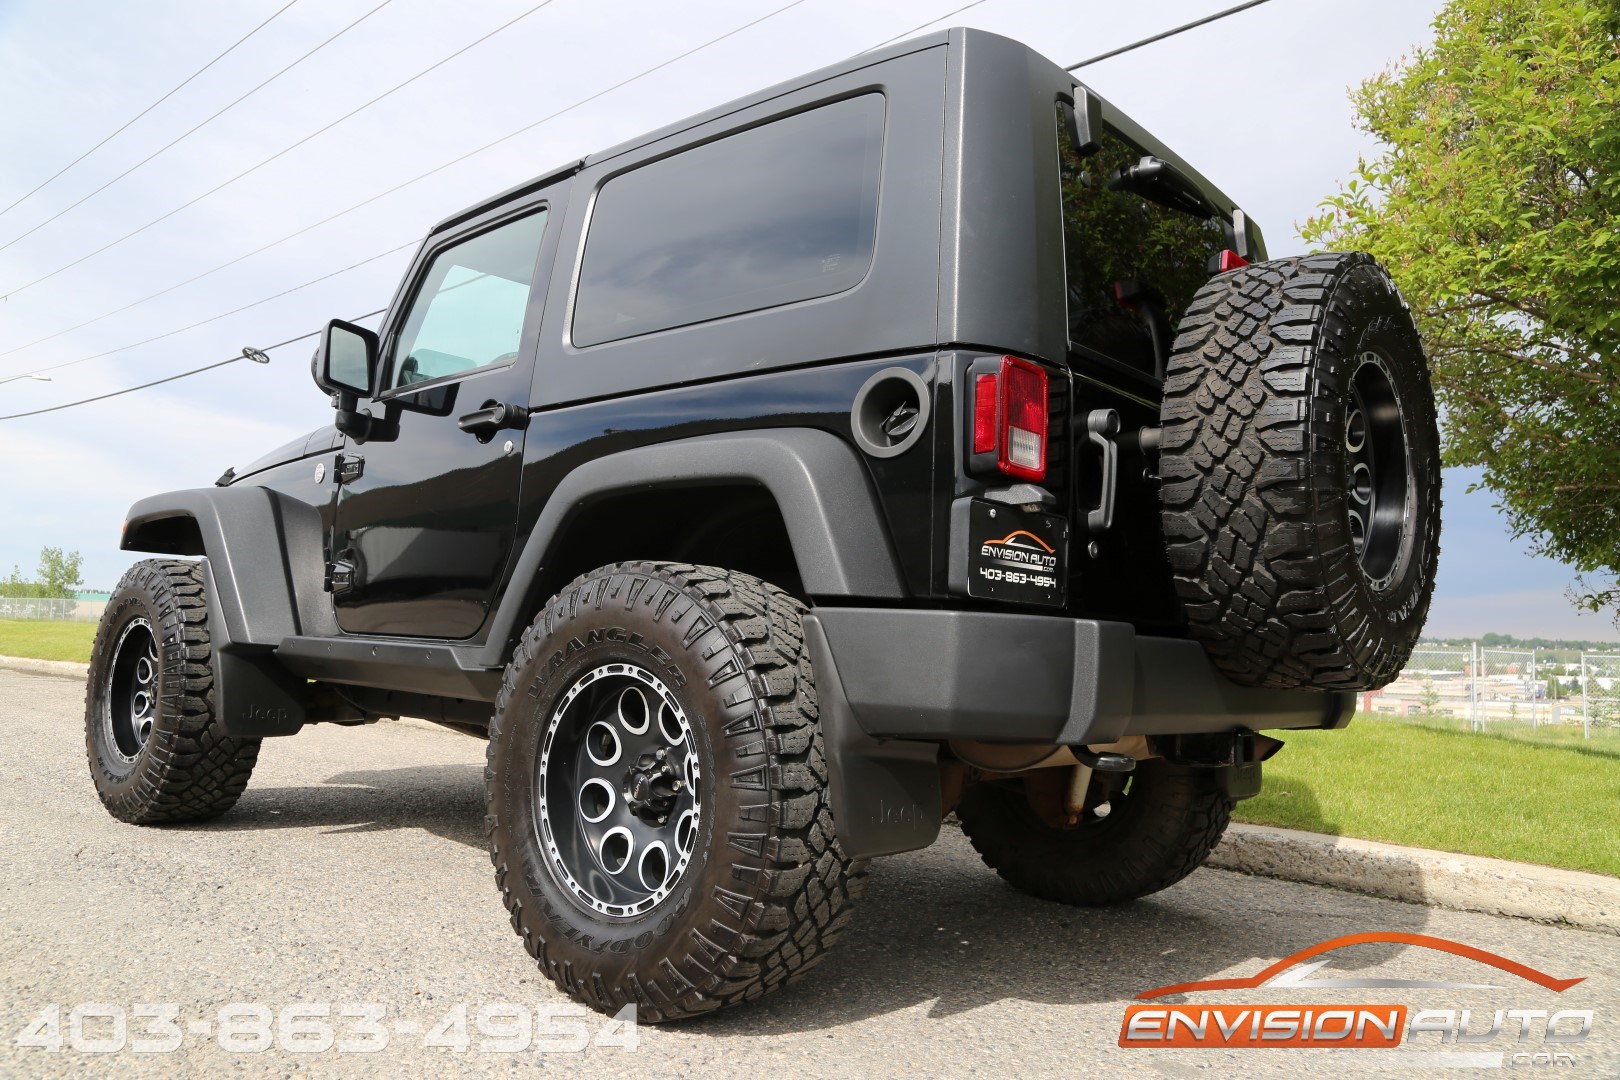 2010 Jeep Wrangler Custom Lift – Winch Bumper – LED Lights - Envision Auto 2010 Jeep Liberty Gate Light Stays On